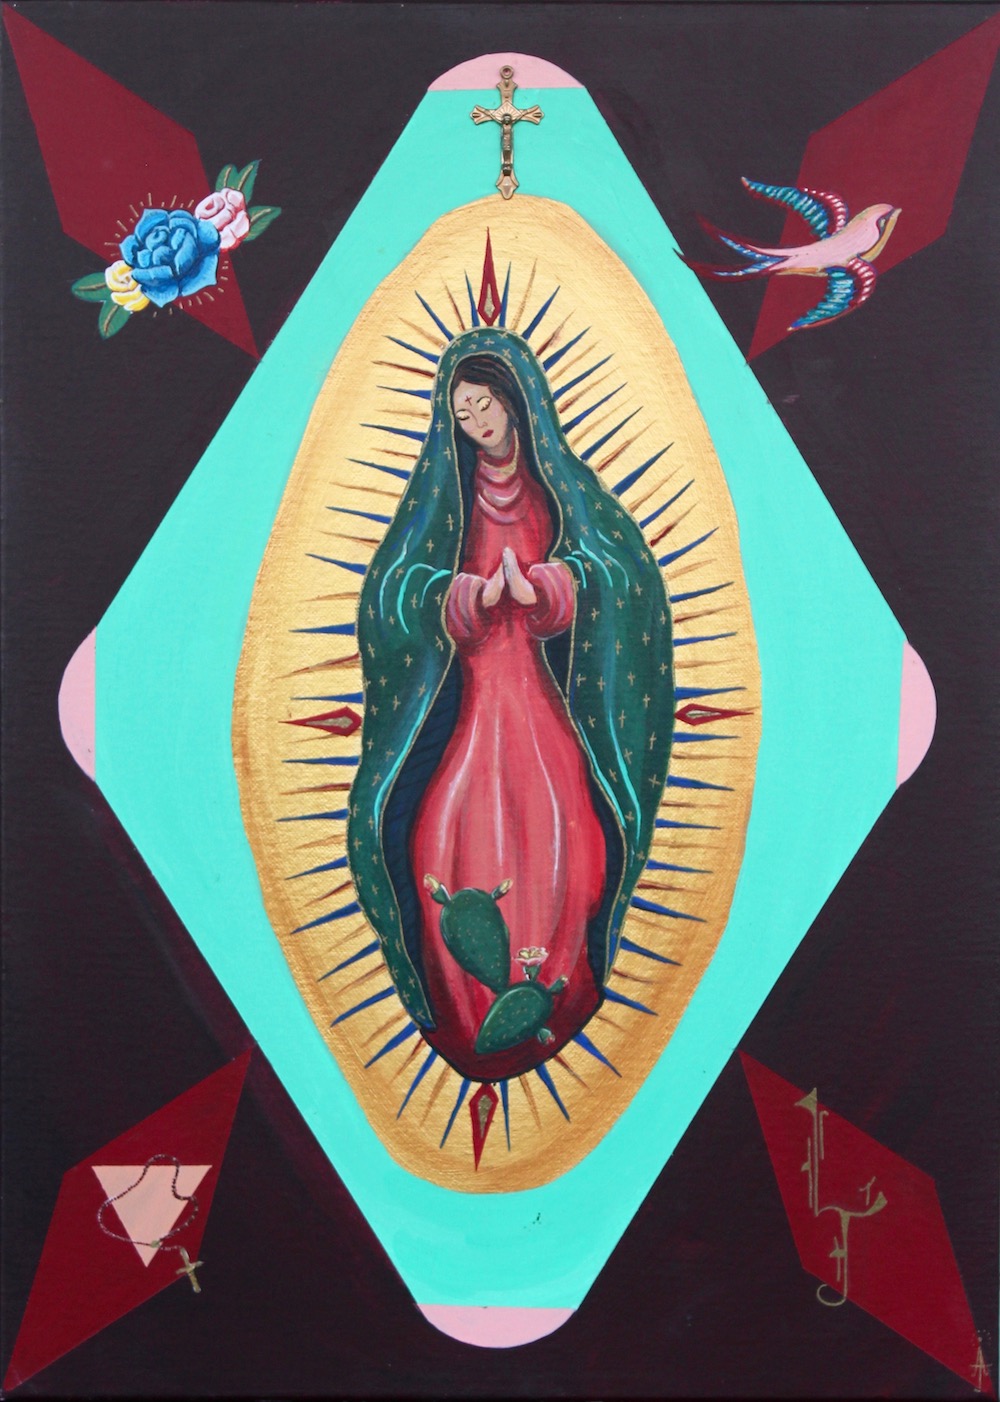 “The Virgin” © Audrey Jackson; used by permission